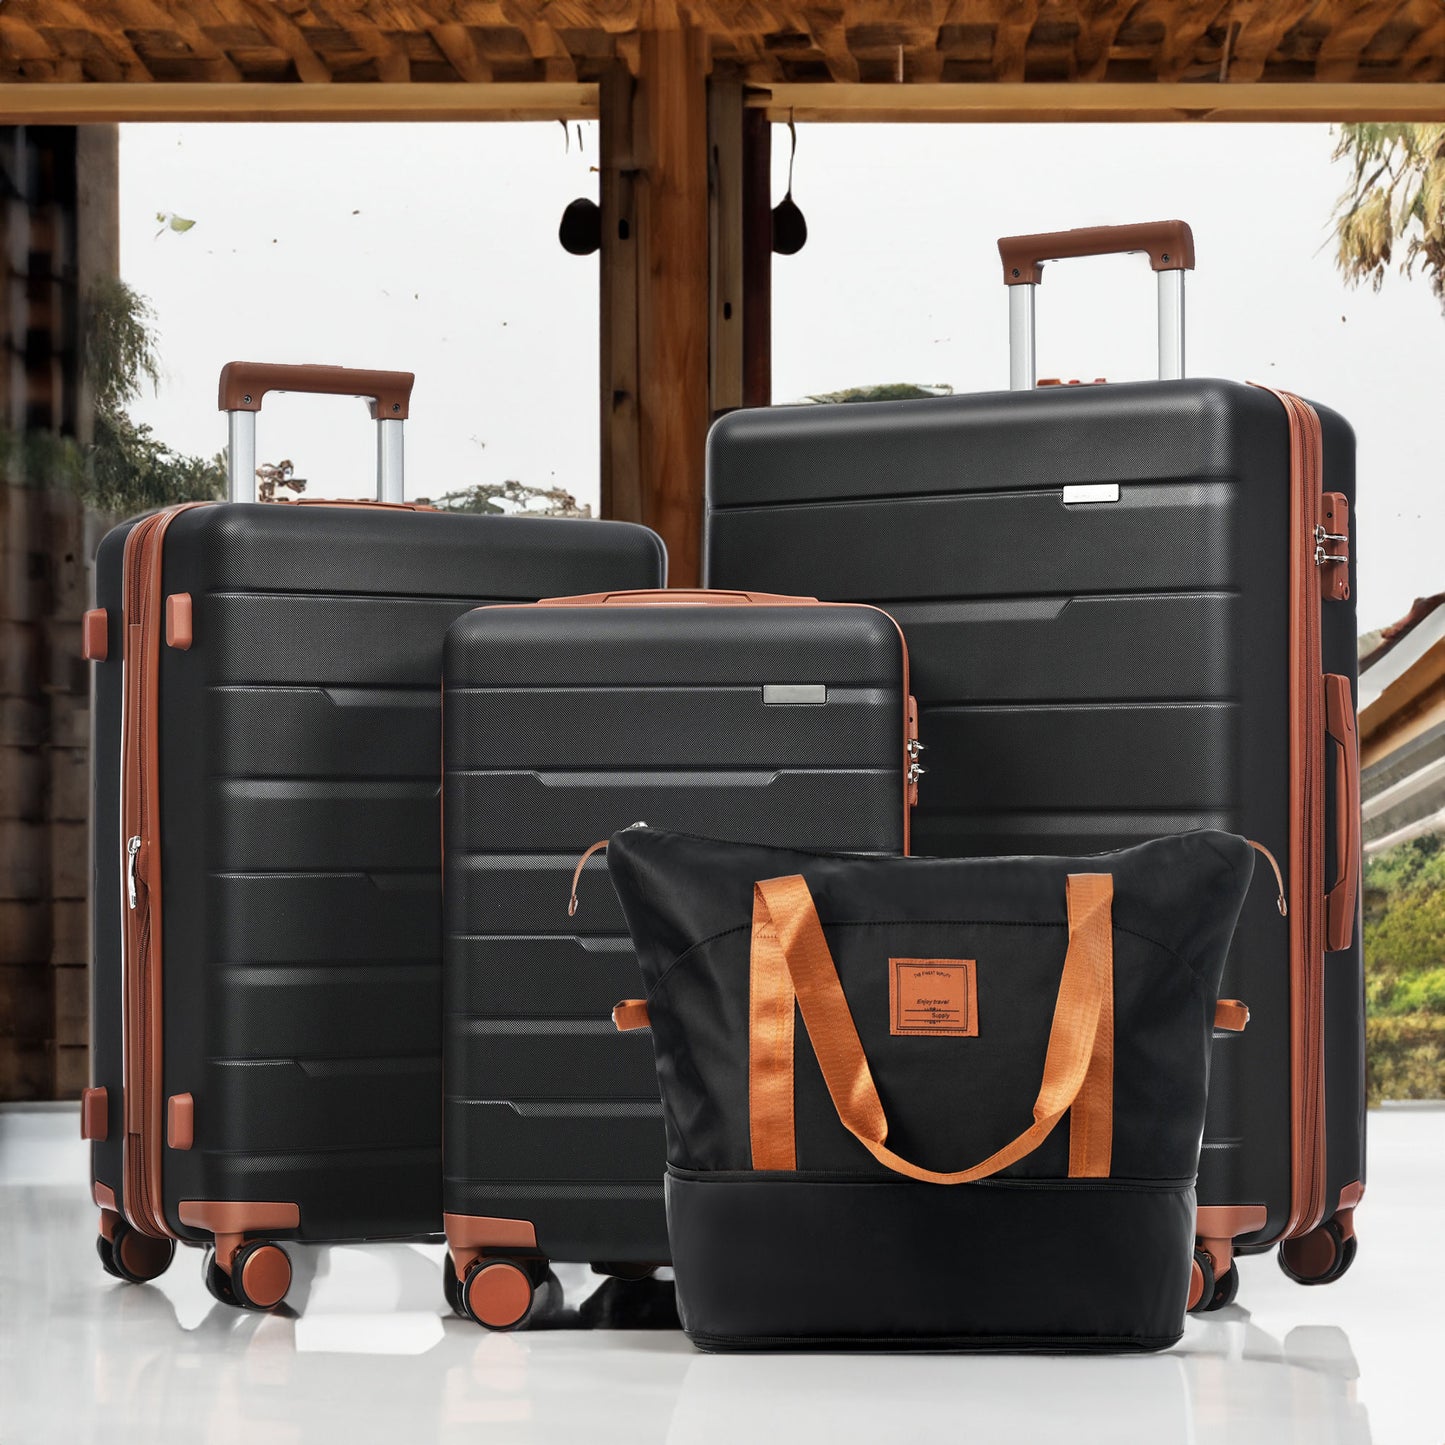 Luggage Sets 4 Piece Carry On Luggage Suitcase Set with 360° Spinner Wheels black and brown